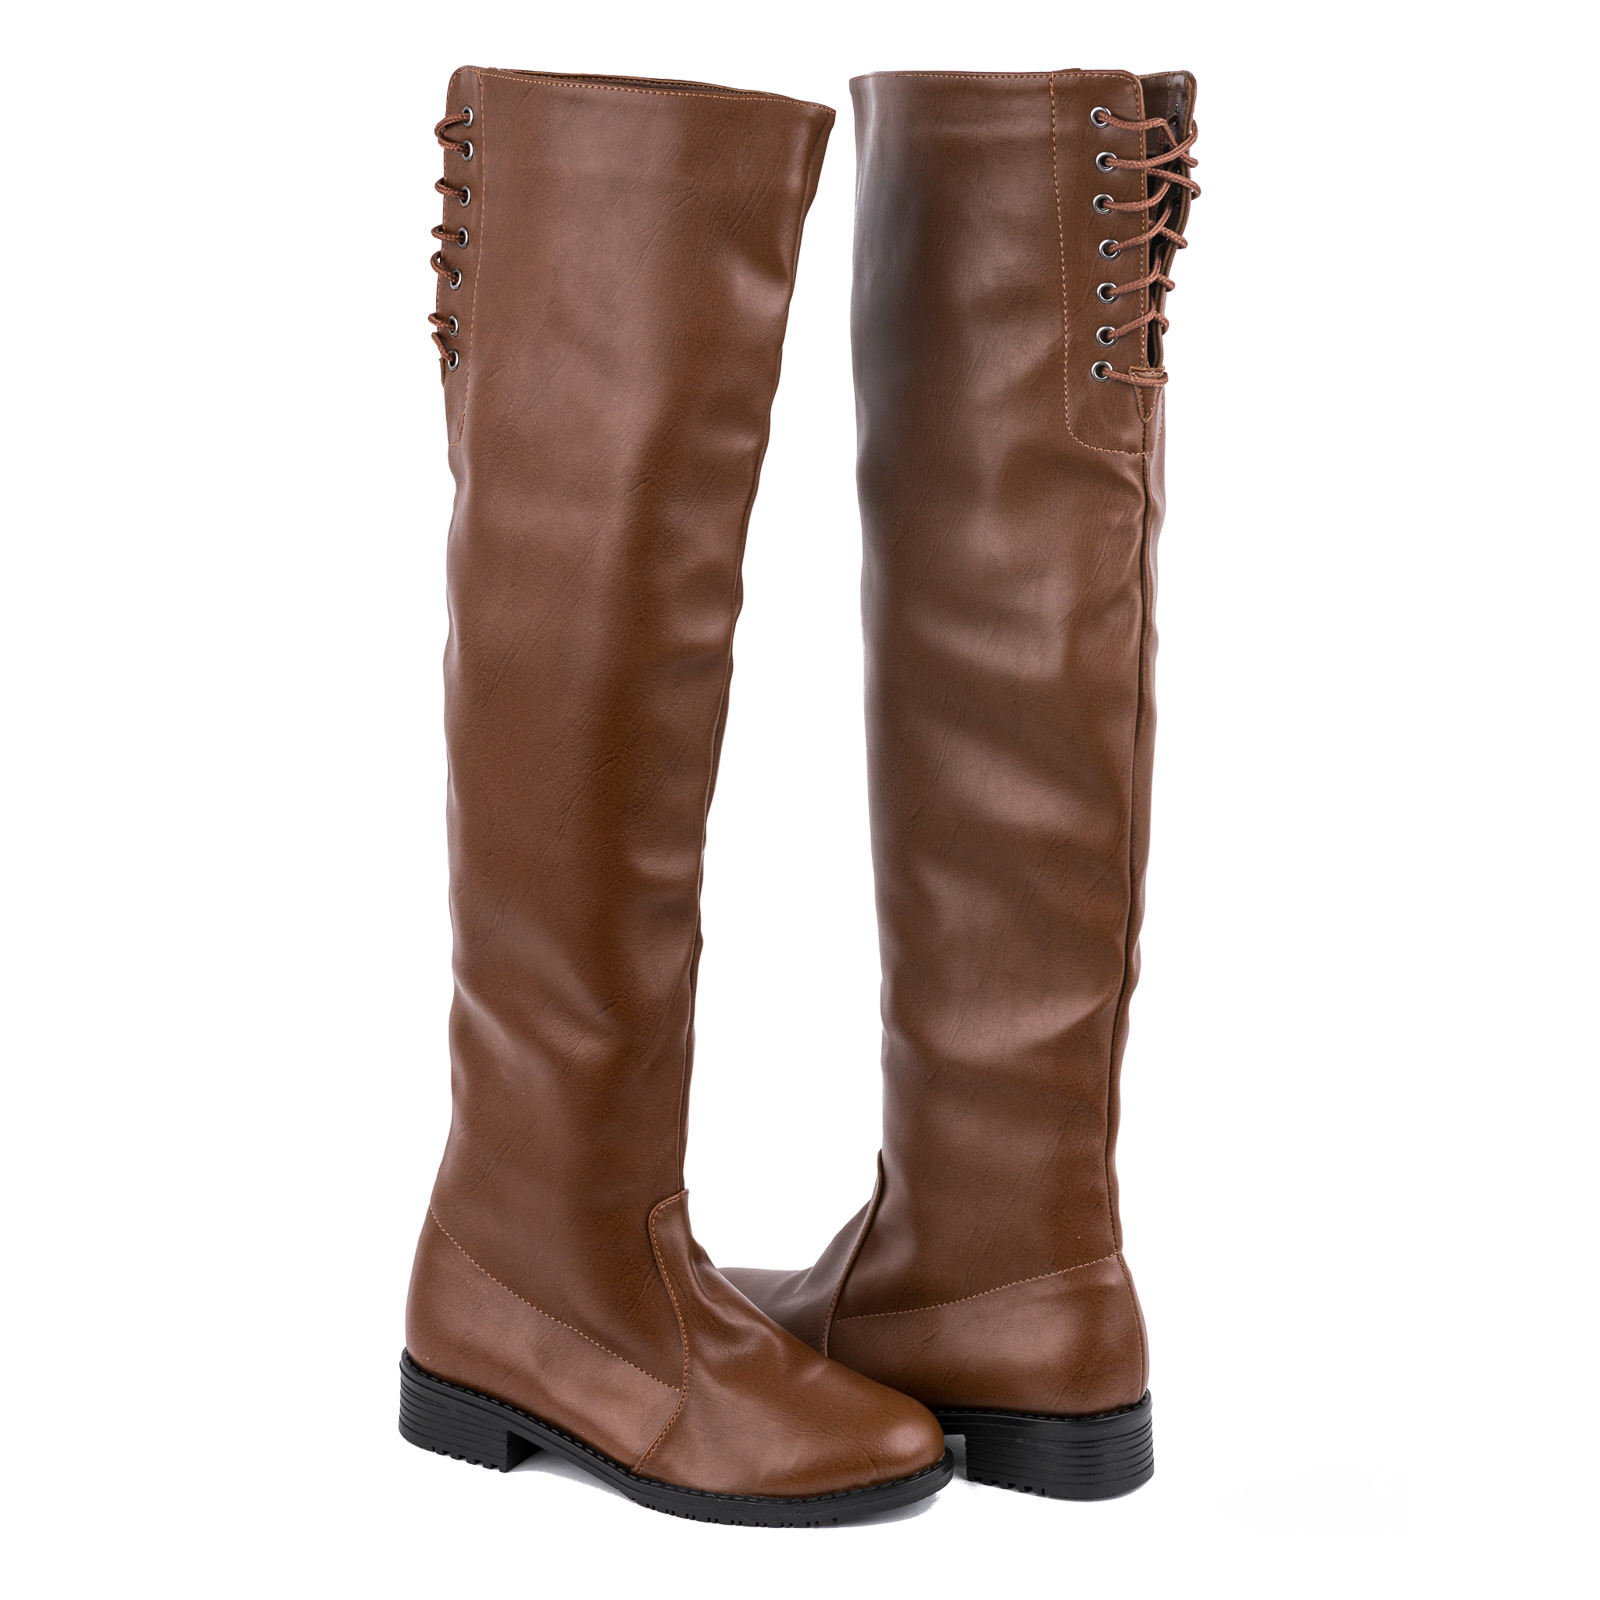 FLAT KNEE HIGH BOOTS WITH LACES - CAMEL